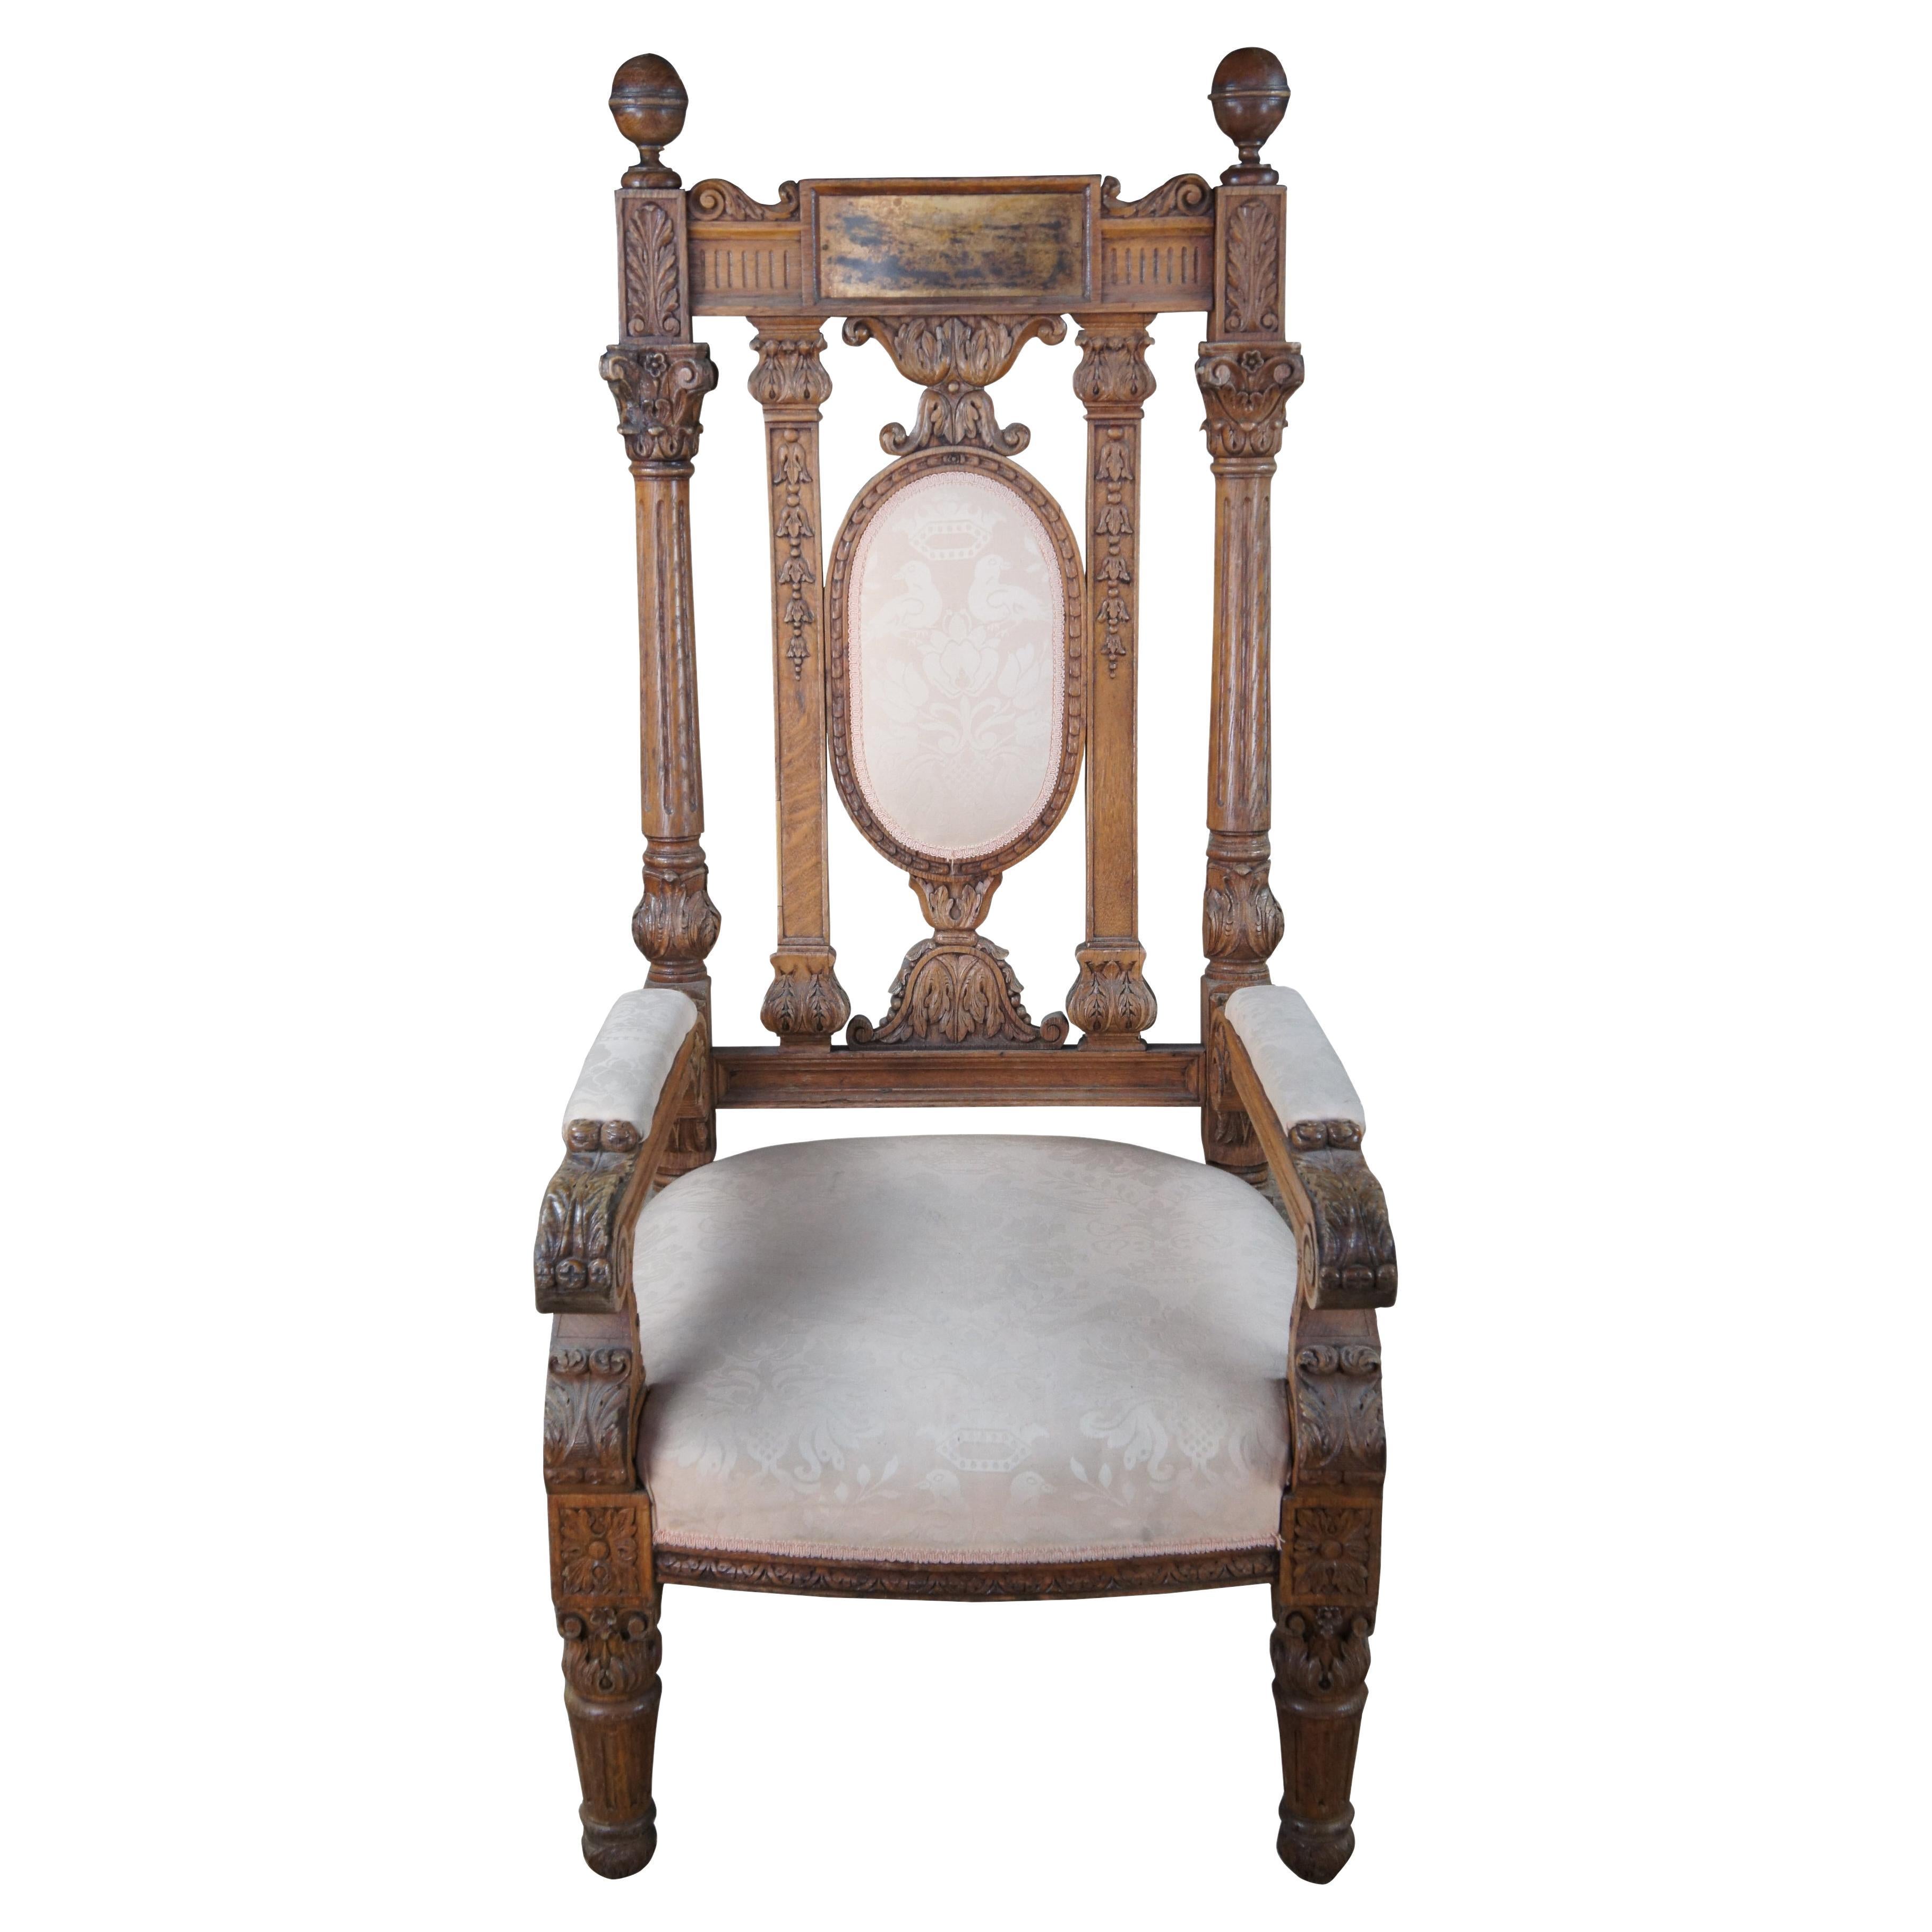 Monumental Antique Victorian Ornate Carved Oak Throne Arm Chair 58"